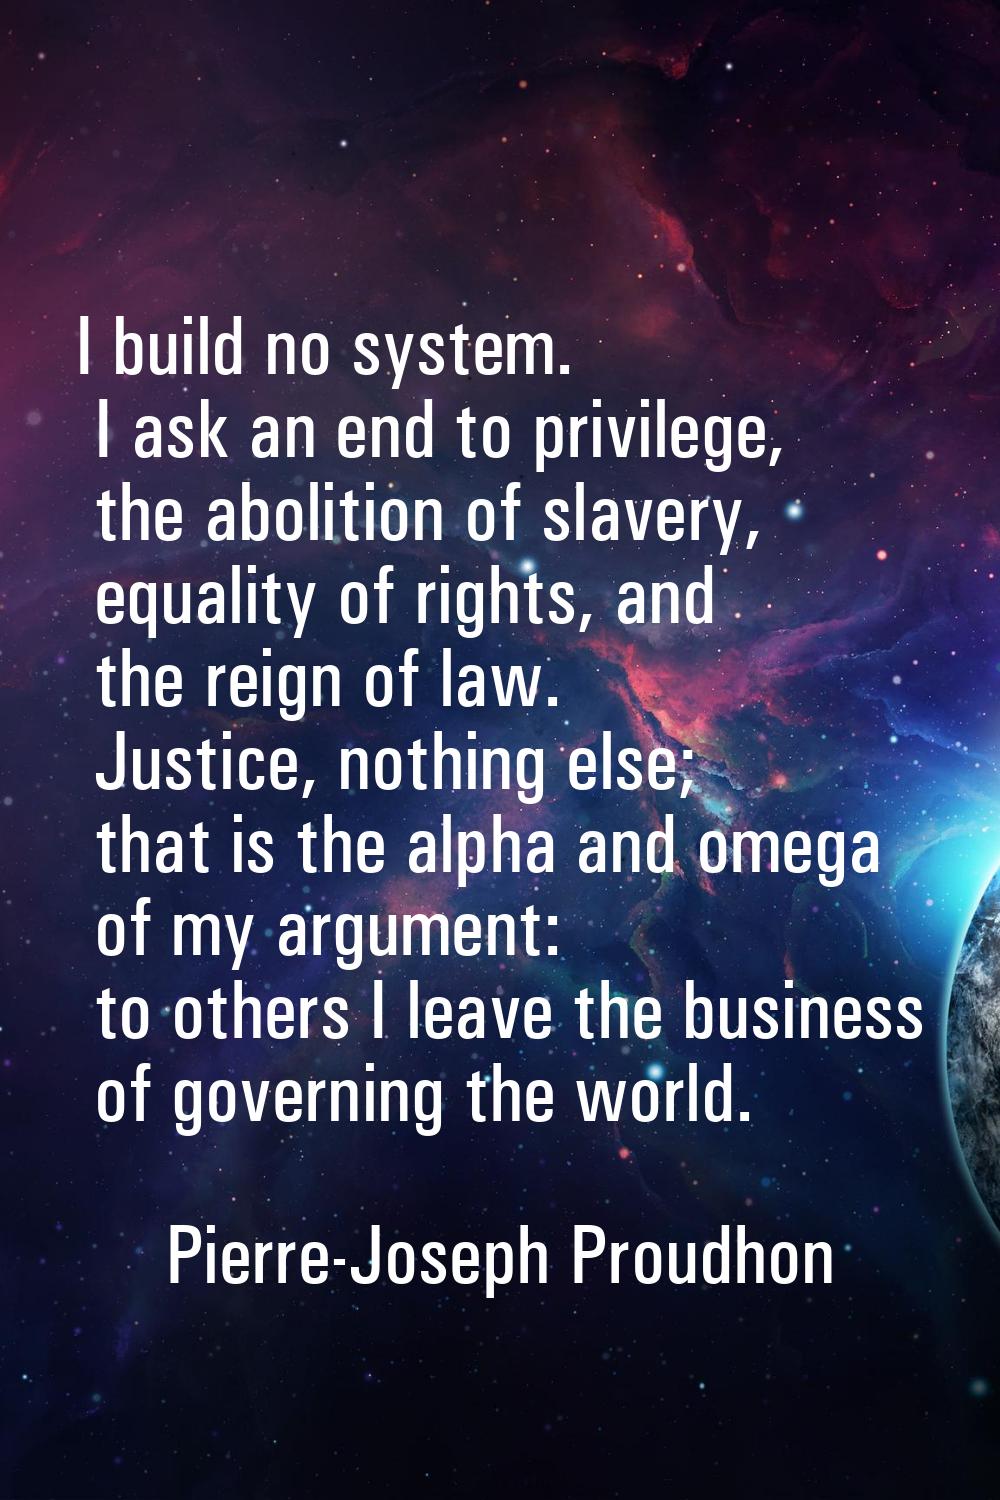 I build no system. I ask an end to privilege, the abolition of slavery, equality of rights, and the